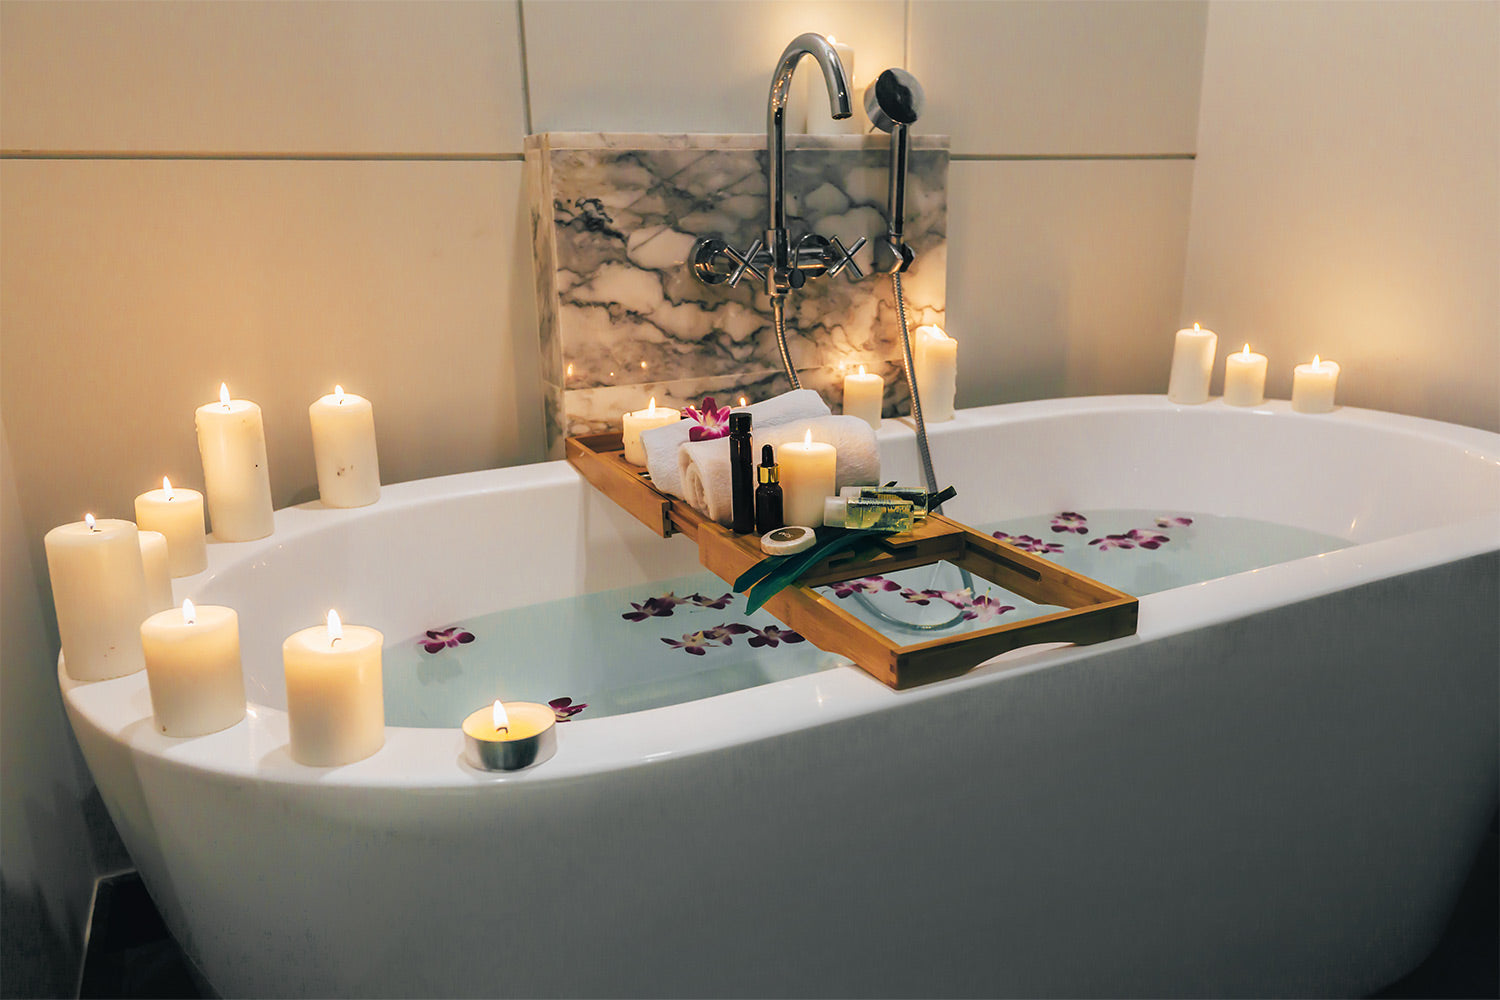 What To Put In A Bathtub For Relaxation?